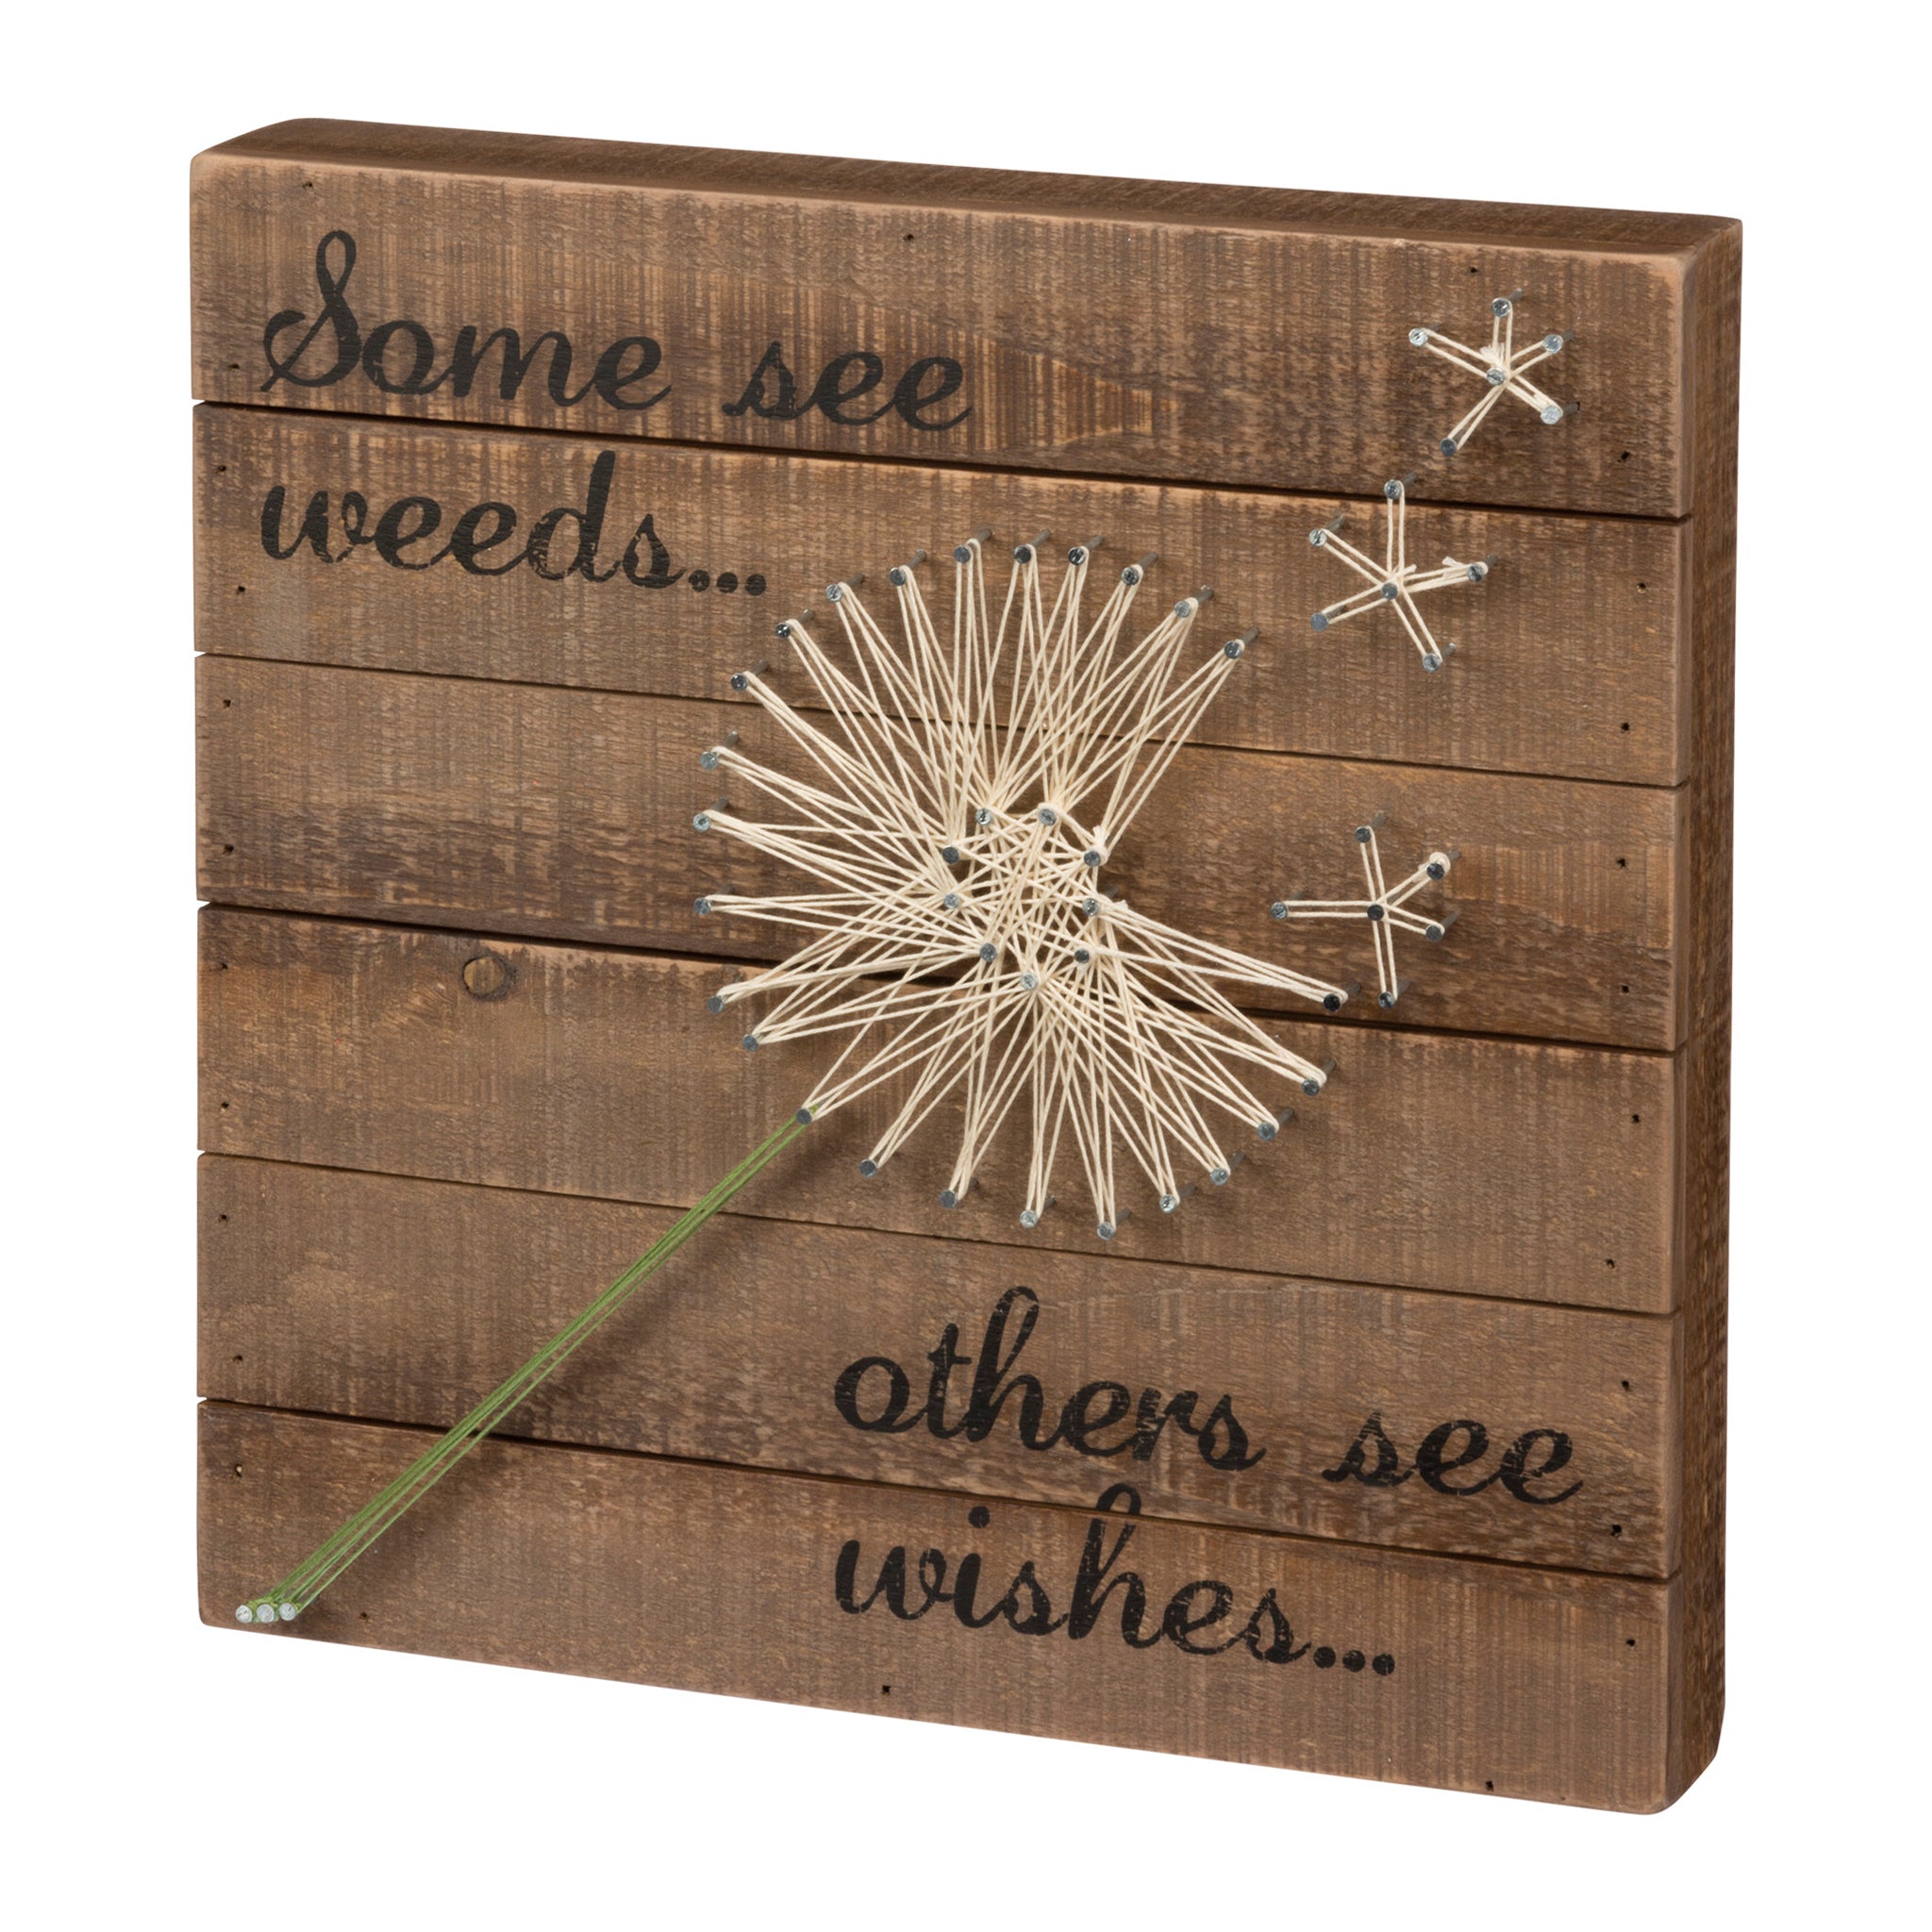 Some See Weeds…Others See Wishes... String Art Sign